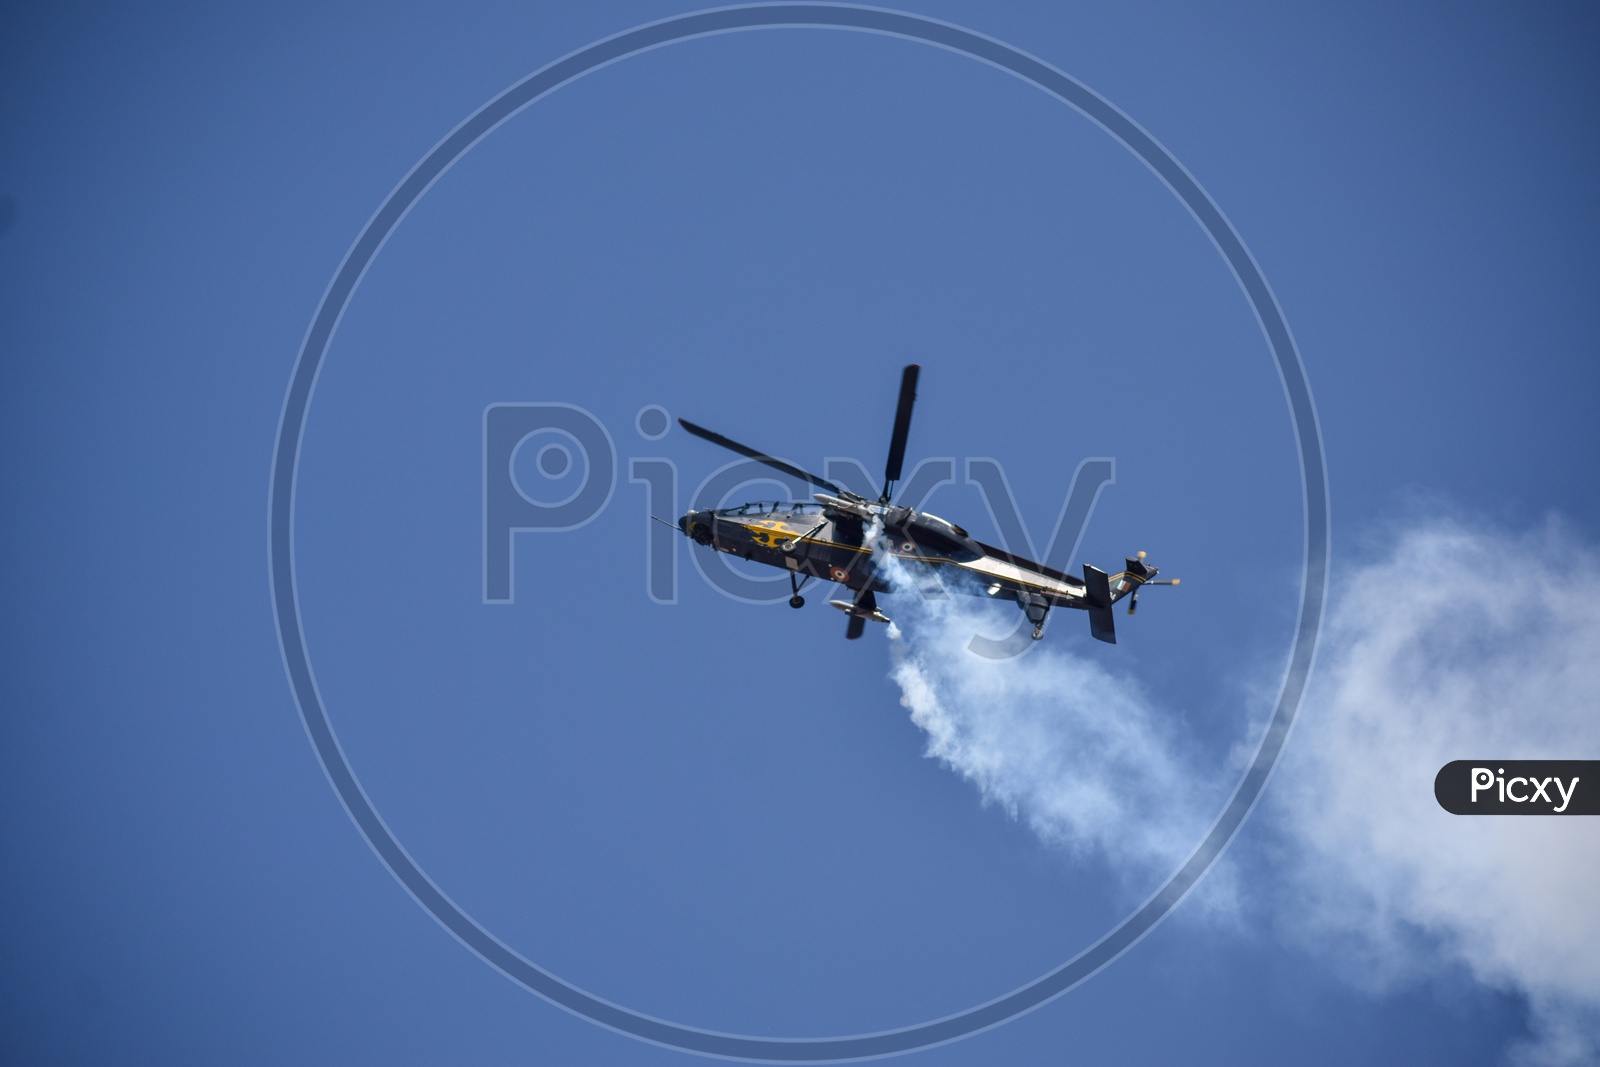 Indian Air Force Light Combat Helicopter at Bangalore Aero India Show 2019